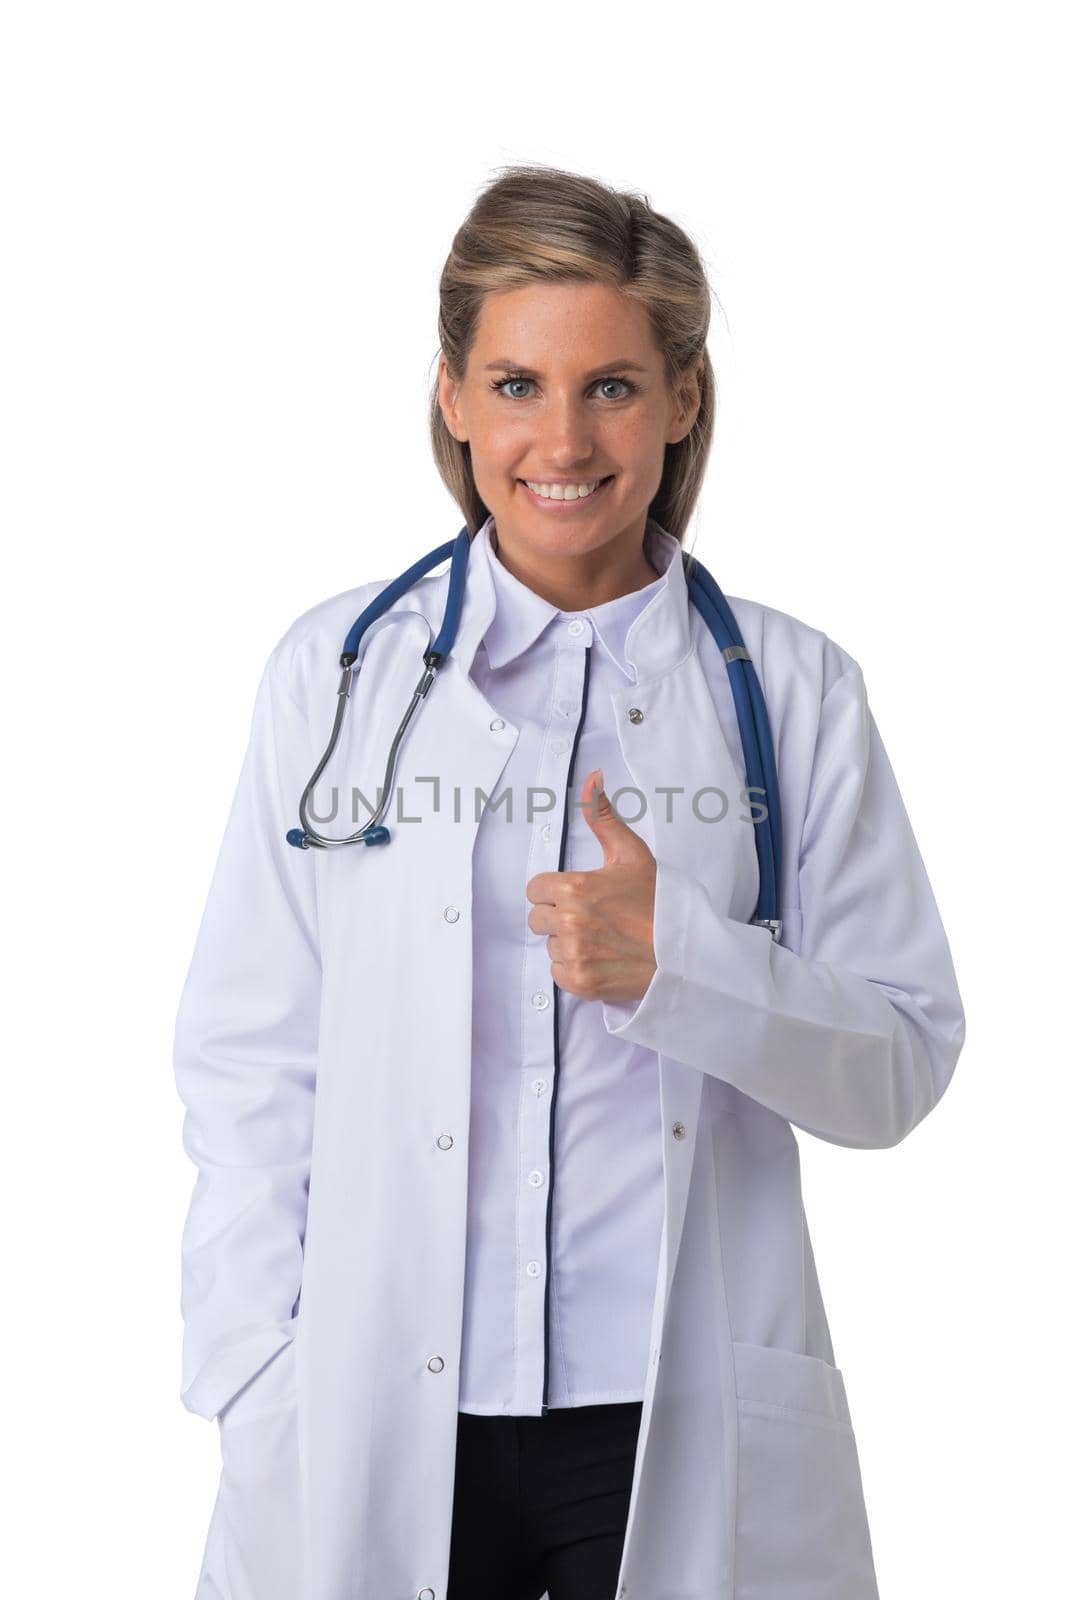 Portrait of female medical doctor with stethoscope standing and smiling isolated on white background